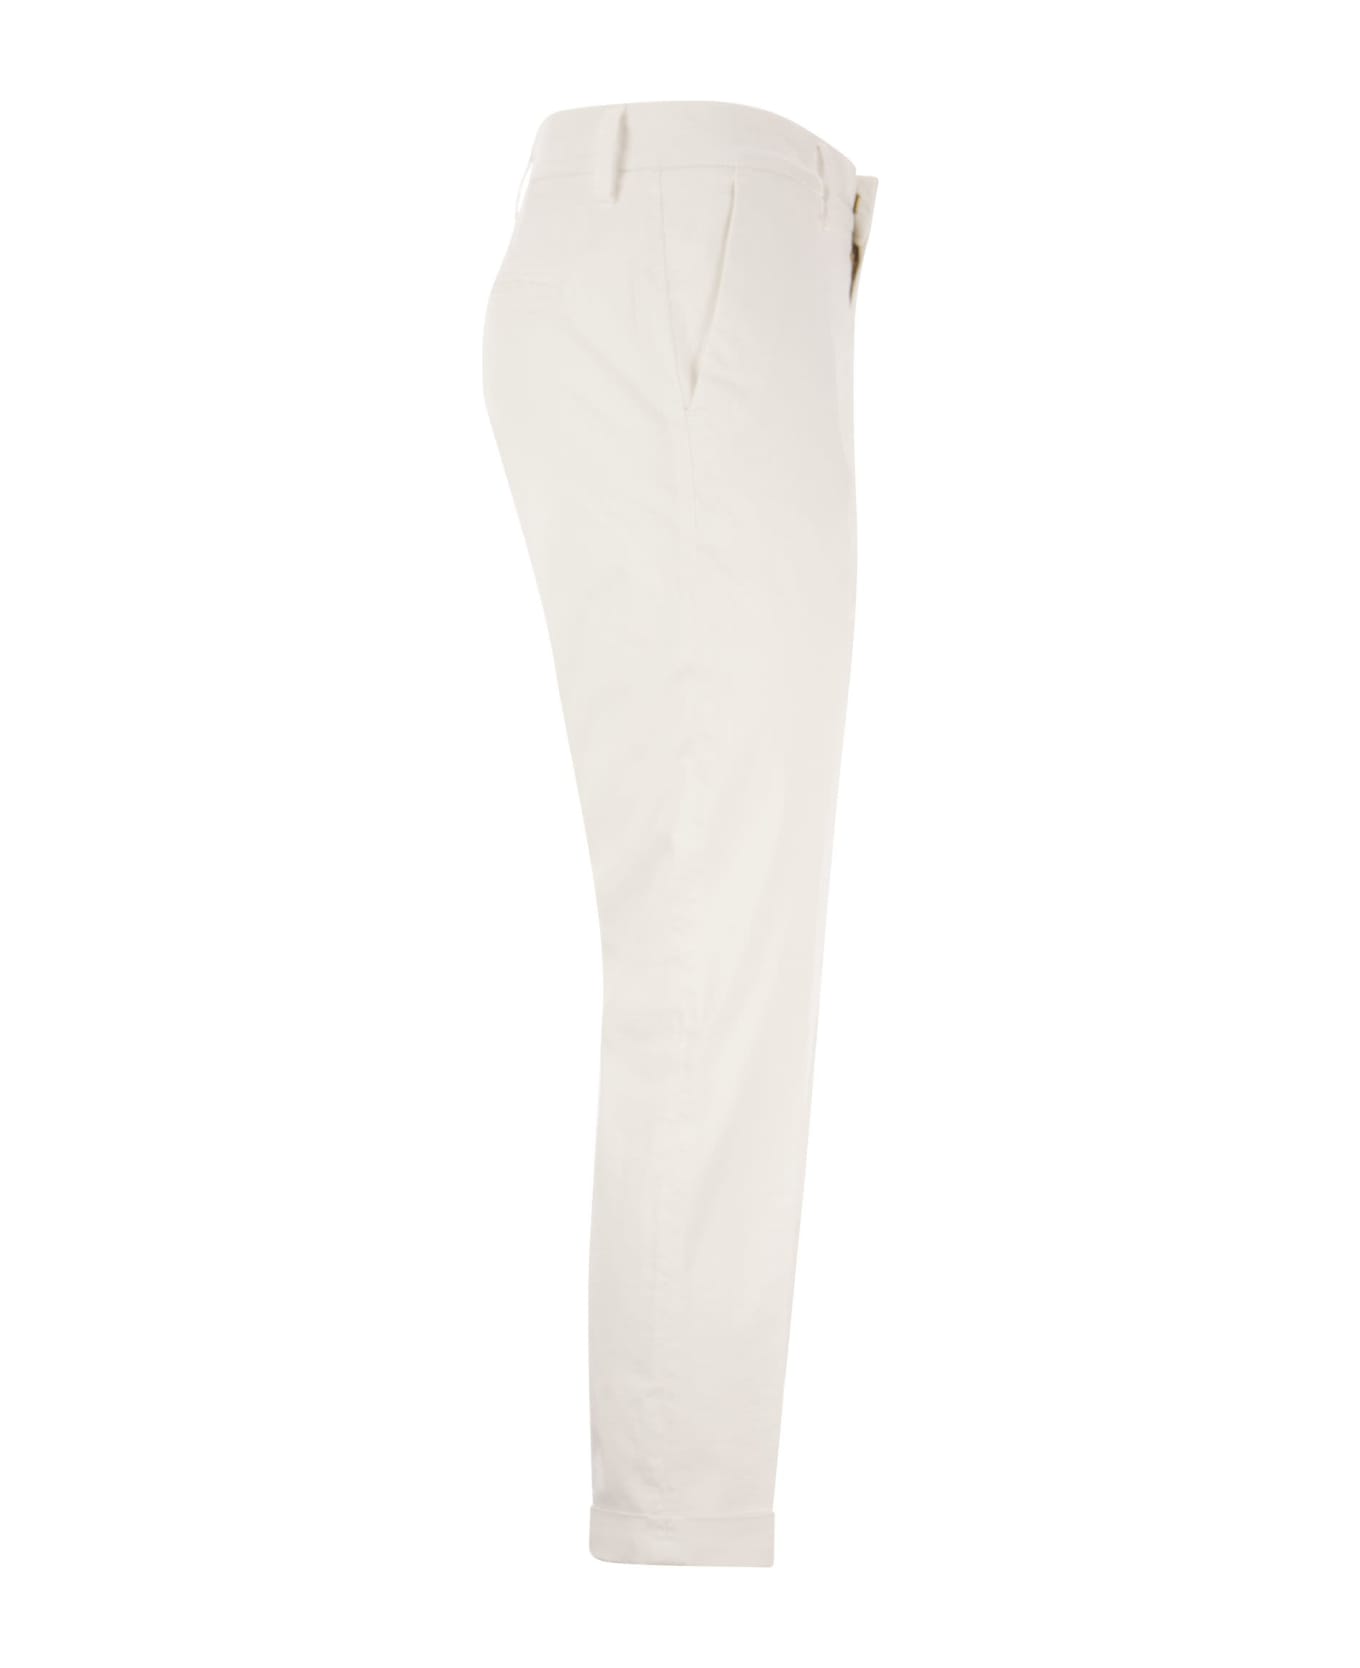 Fay Chino Trousers - White ボトムス